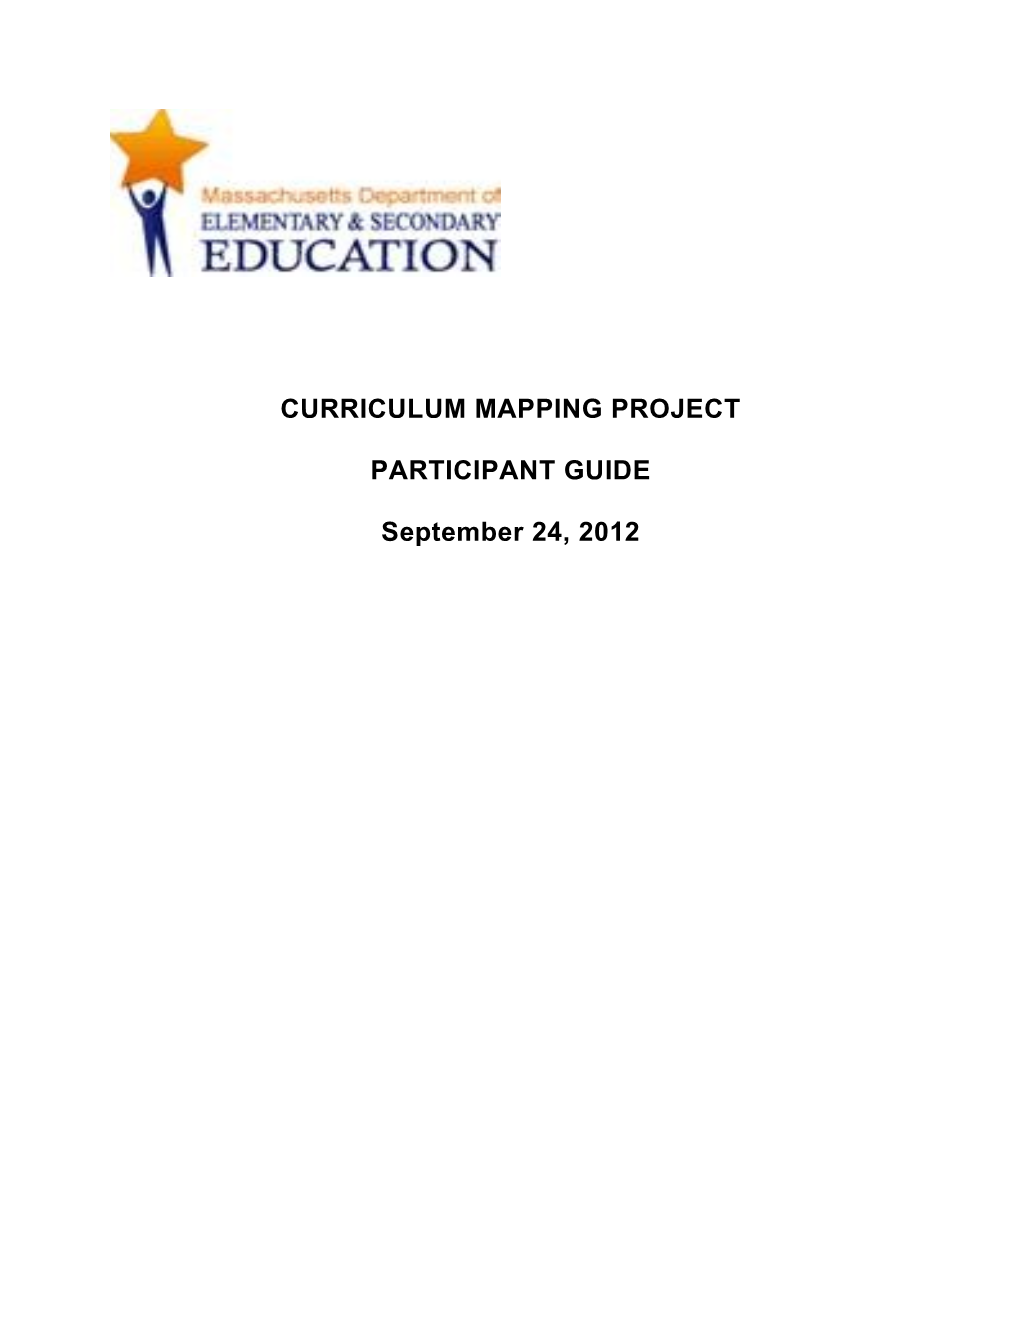 Model Curriculum Map Project Participant Guide Resource